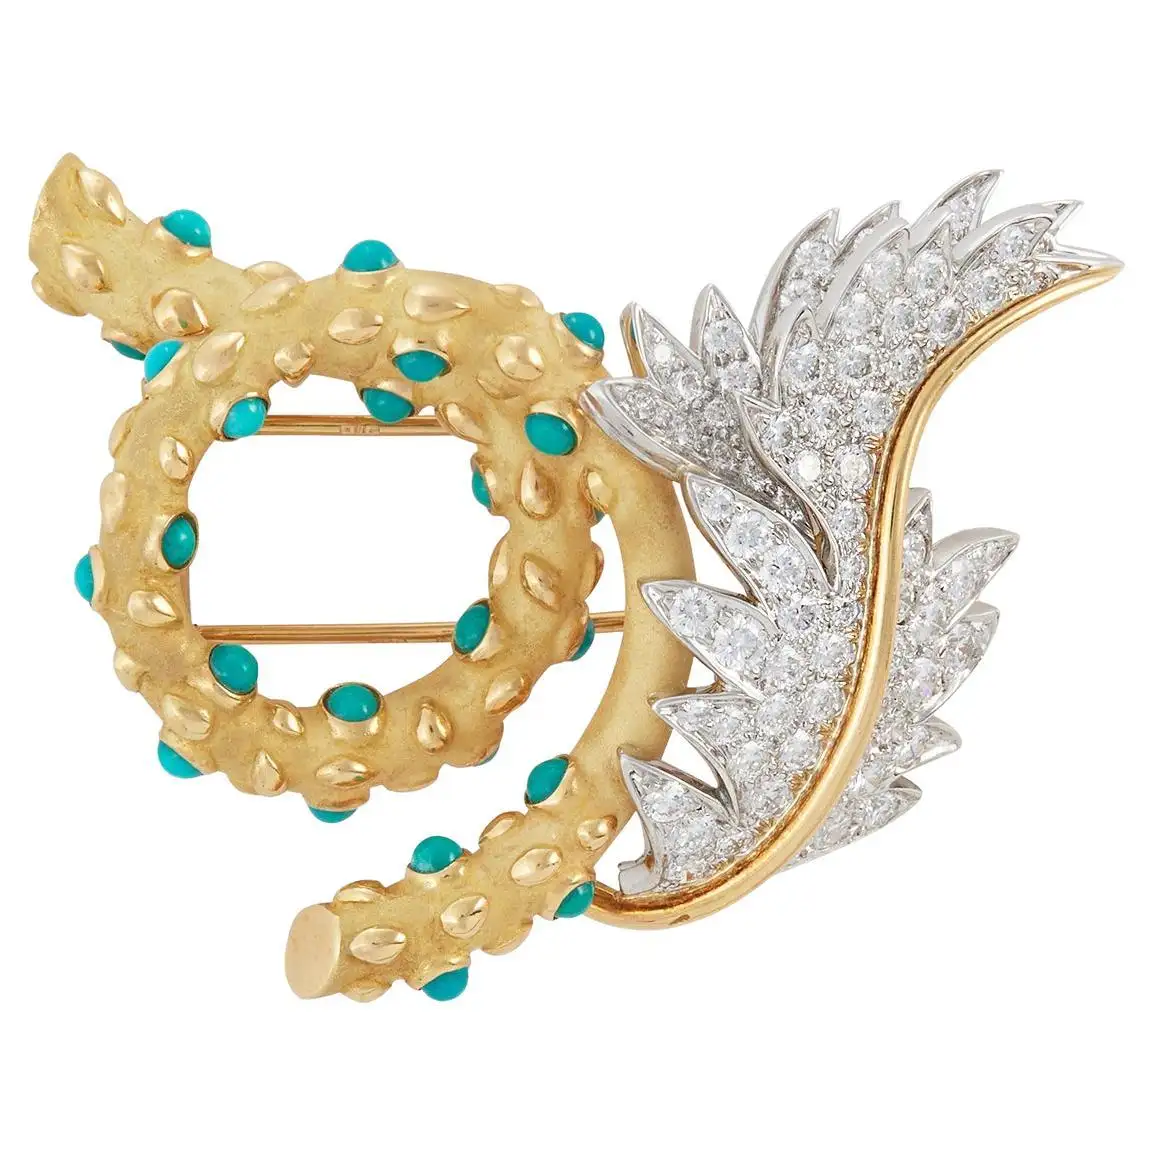 Buy-Diamond-and-Turquoise-brooch-Jean-Schlumberger-for-Tiffany-Co-1.webp